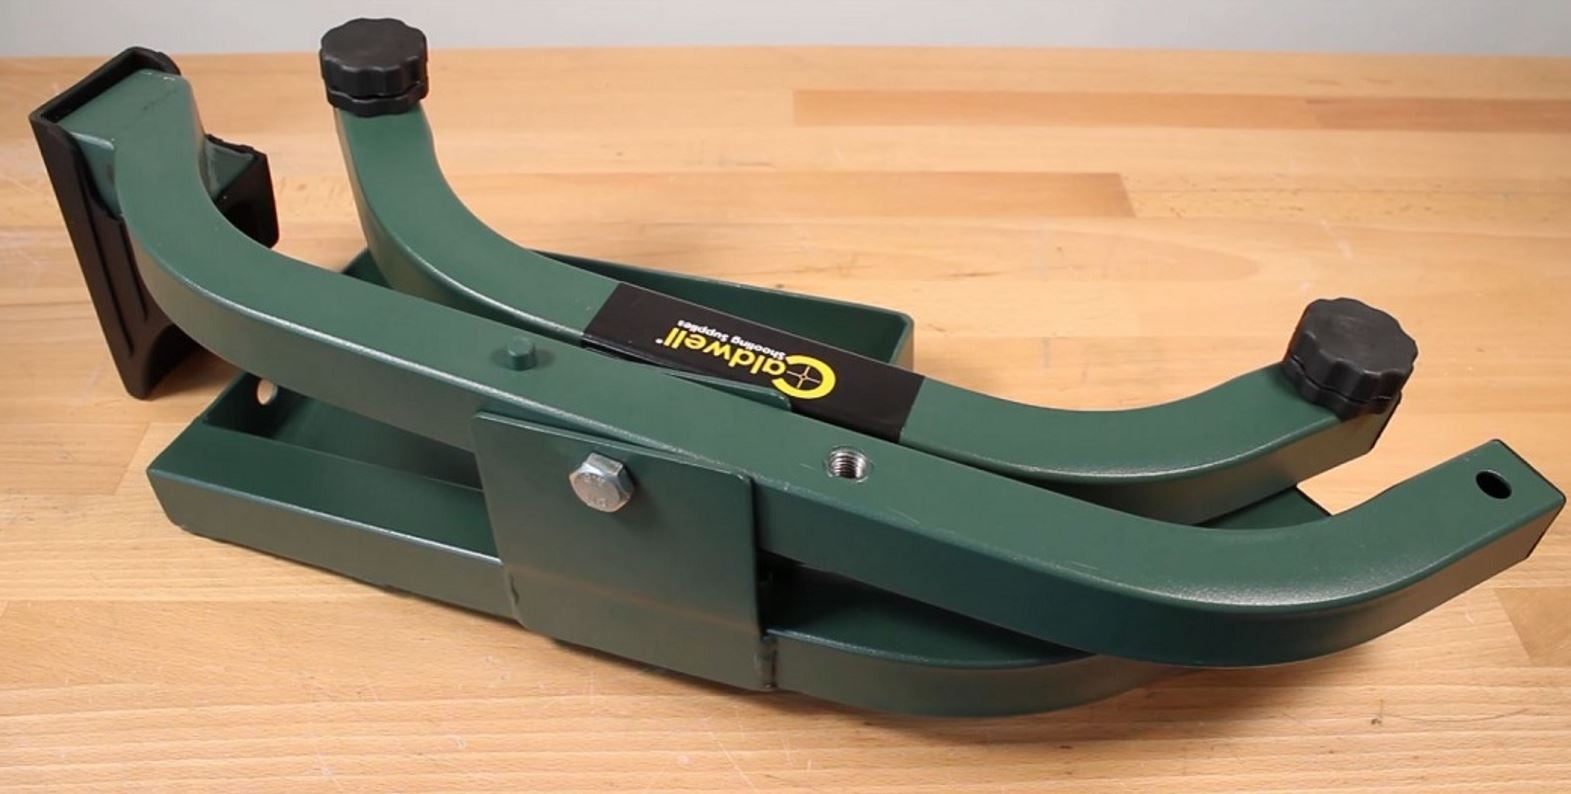 AllOutdoor Review: Caldwell Lead Sled Solo - Shooting Sled Setup